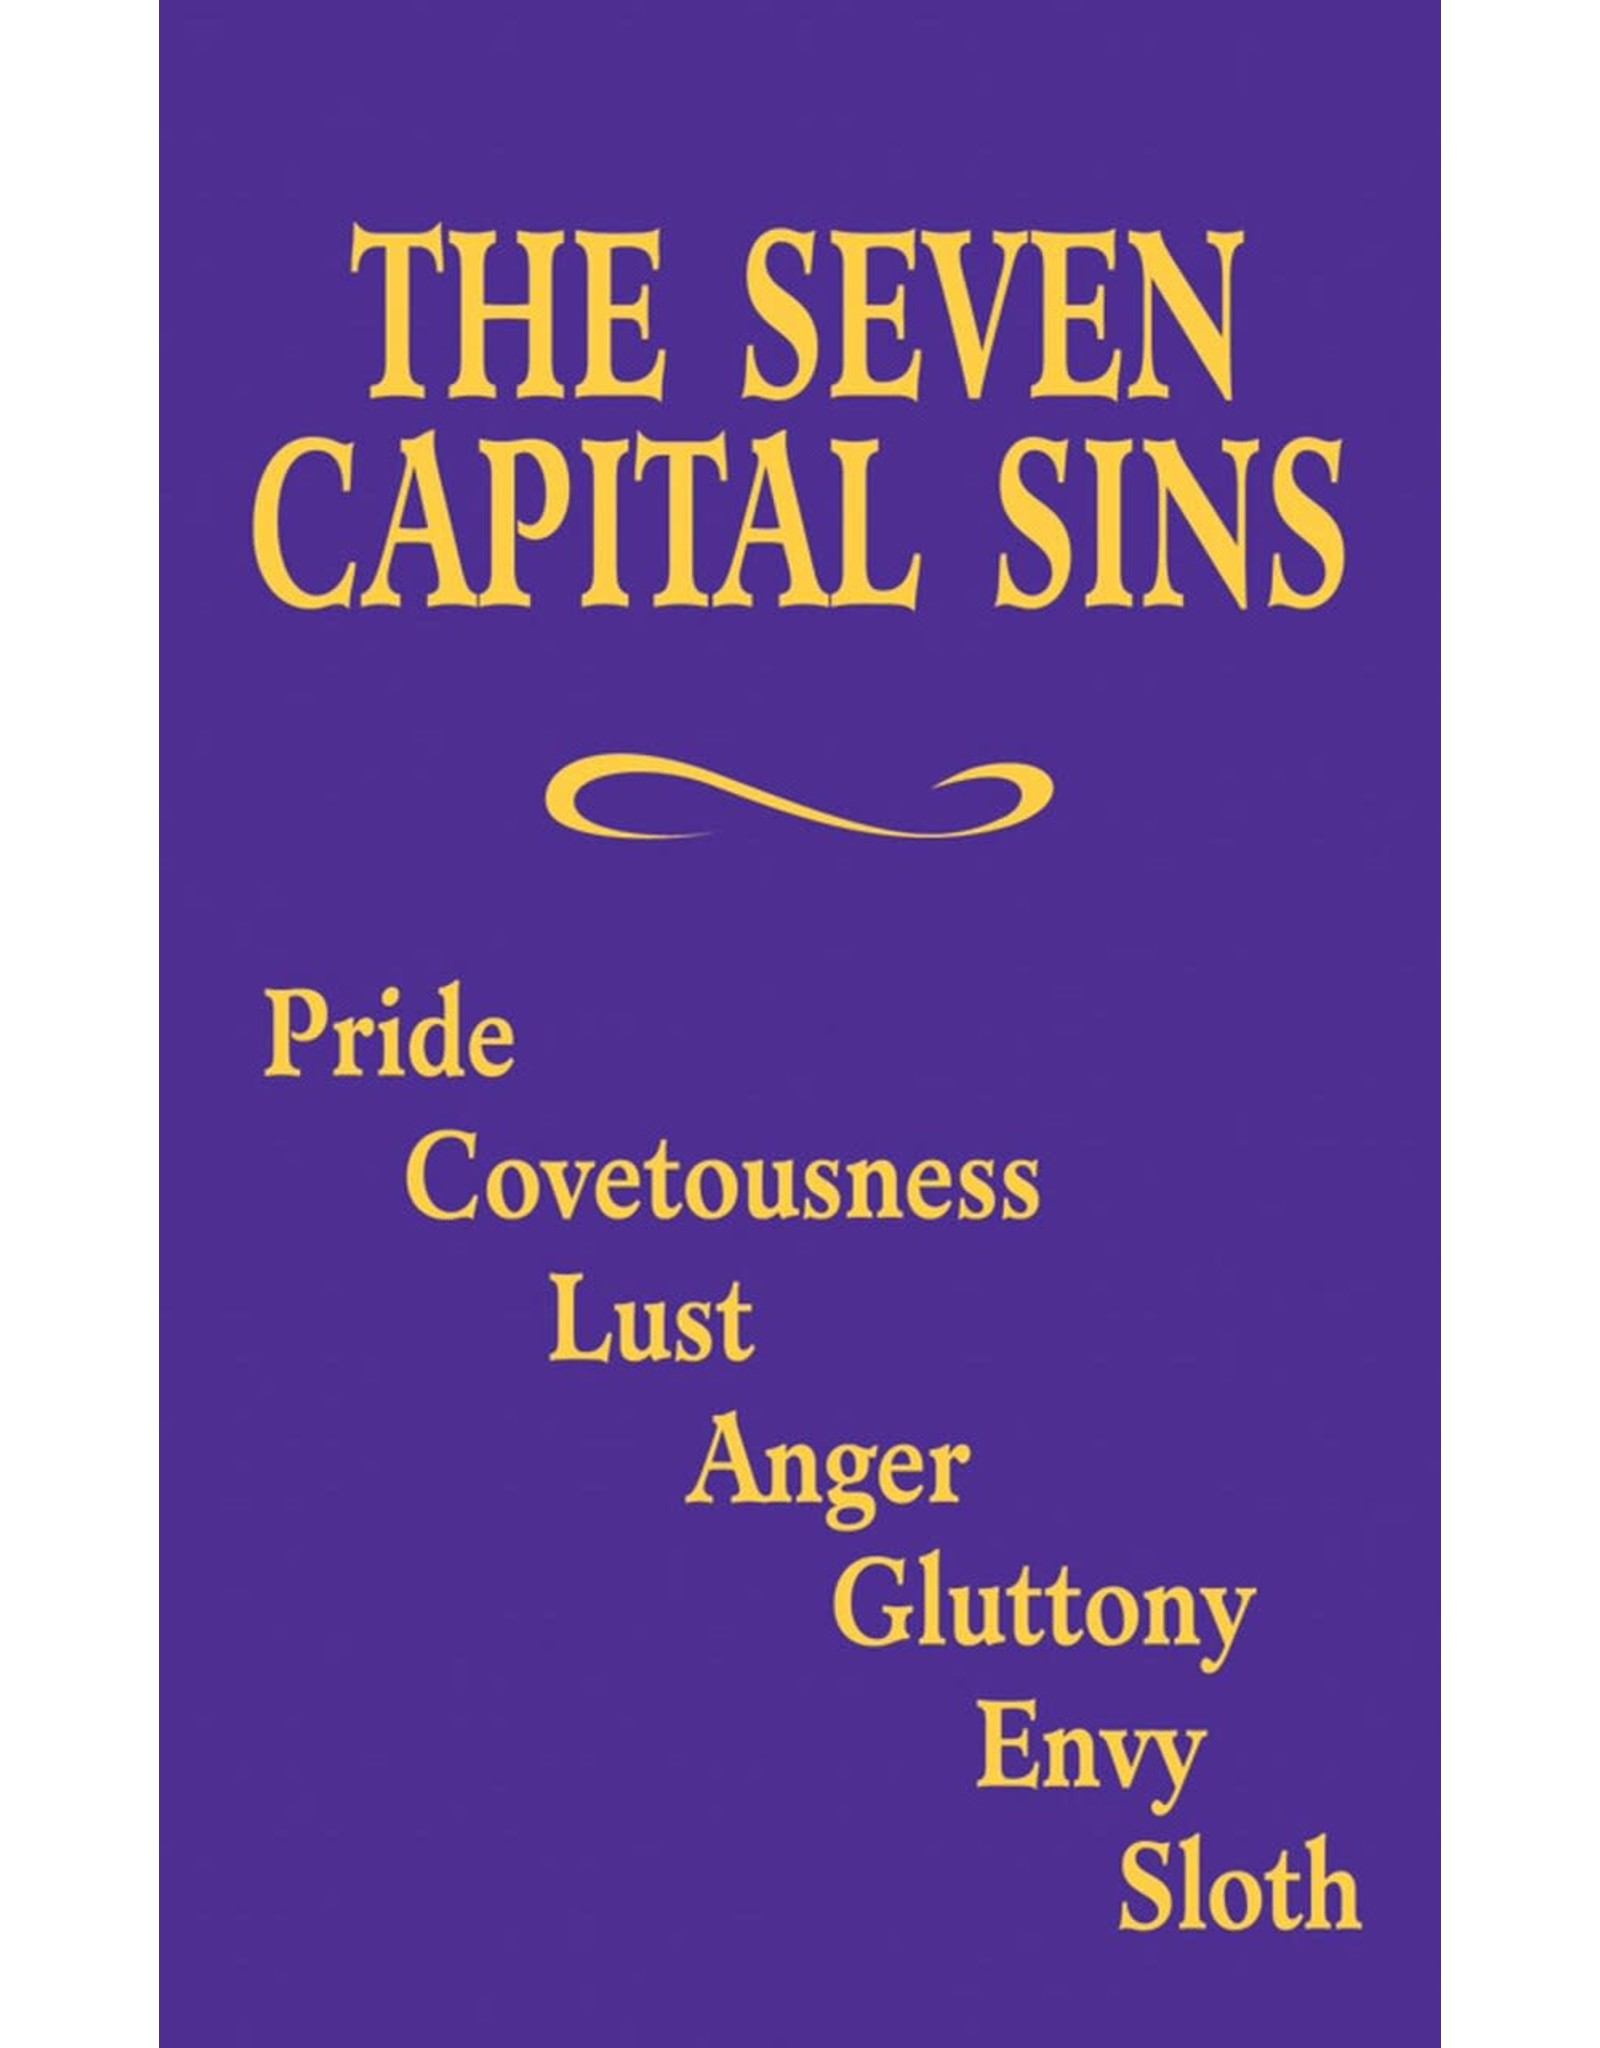 Tan Books The Seven Capital Sins: Pride, Covetousness, Lust, Anger, Gluttony, Envy, Sloth by The Benedictine Convent Of Clyde, Missouri (Booklet)